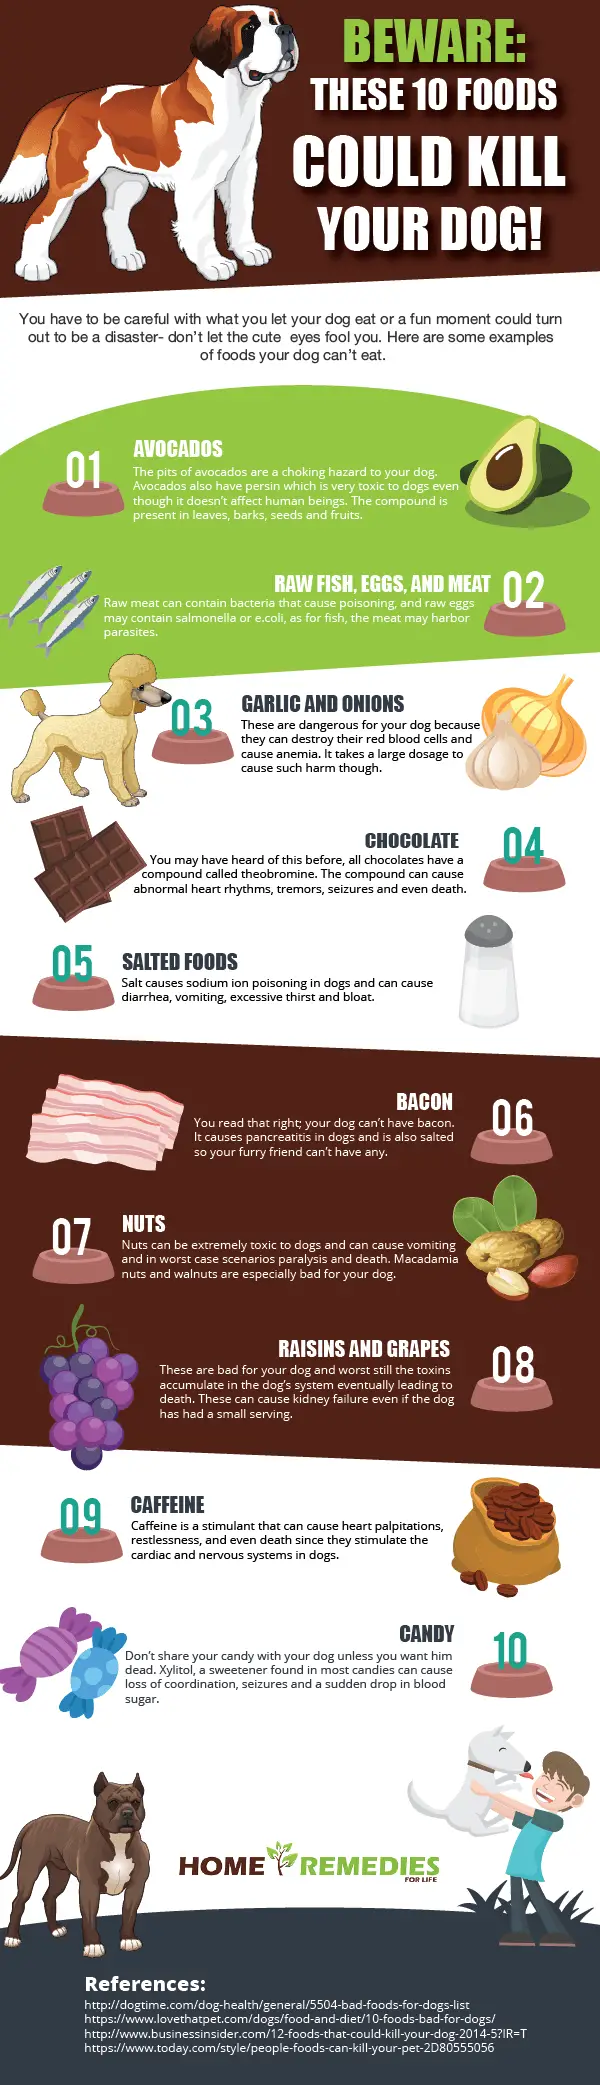 Beware: These 10 Foods Could Kill Your Dog!